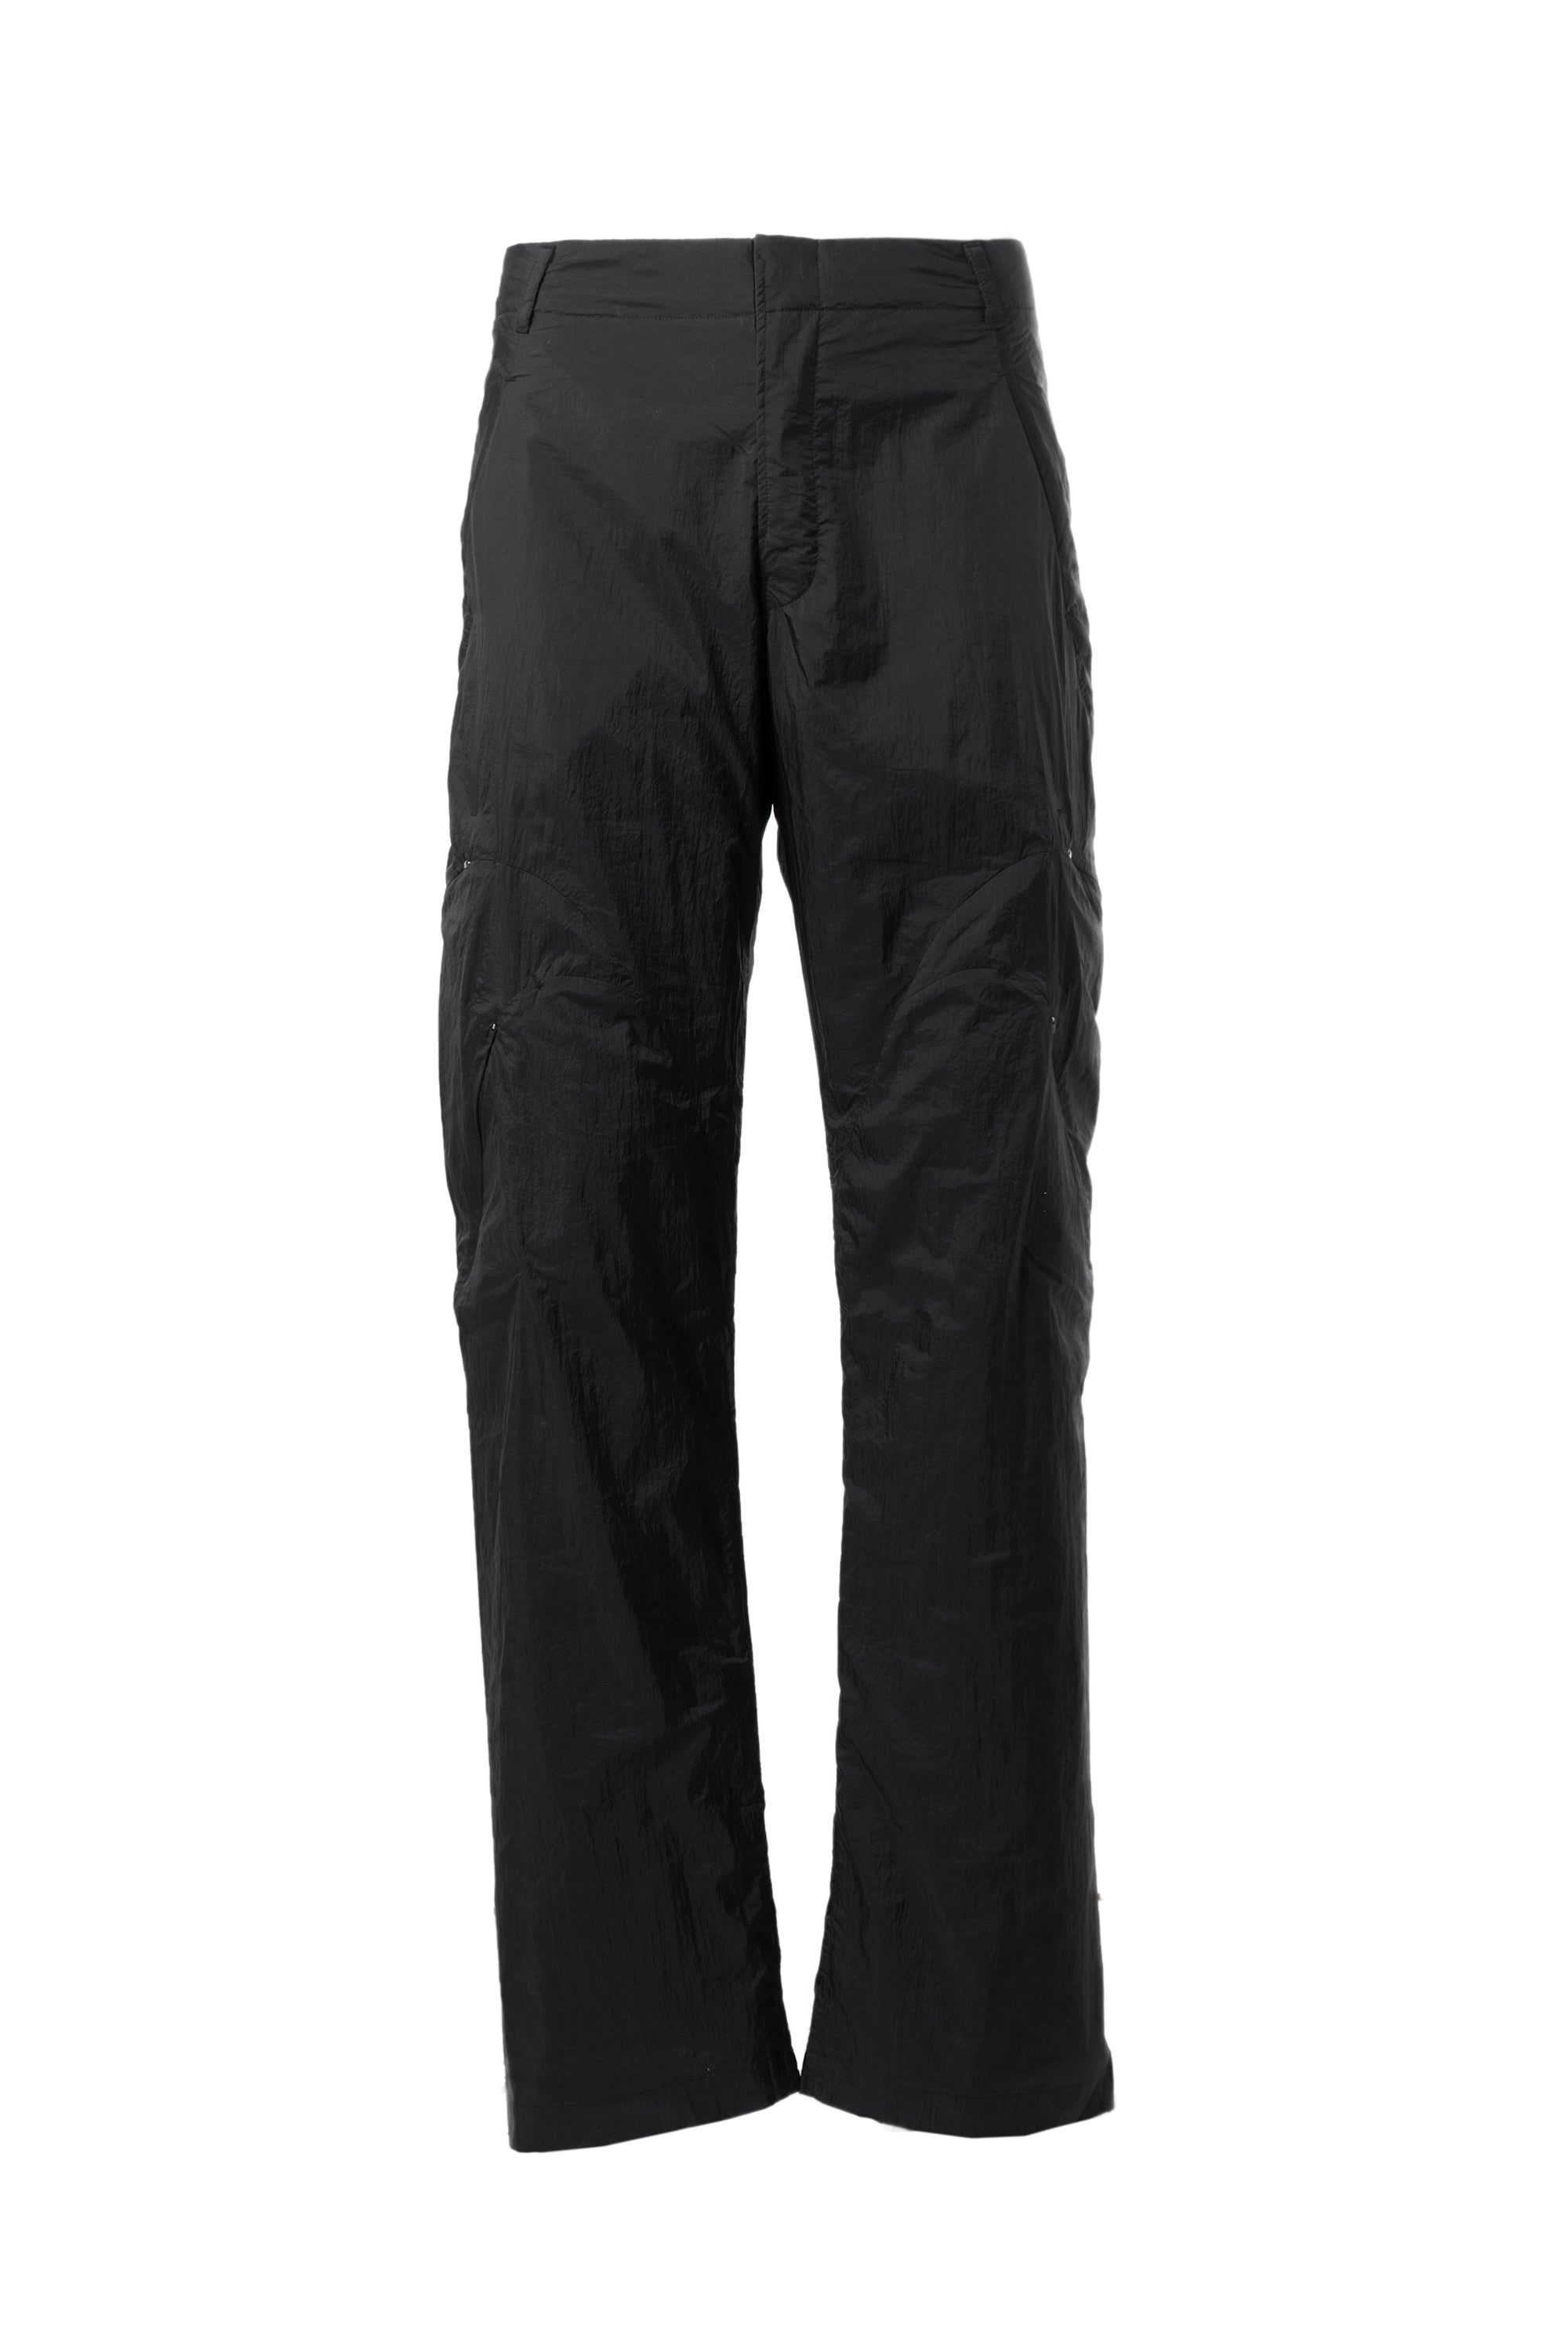 POST ARCHIVE FACTION SS23 5.0+ TROUSERS CENTER / BLK